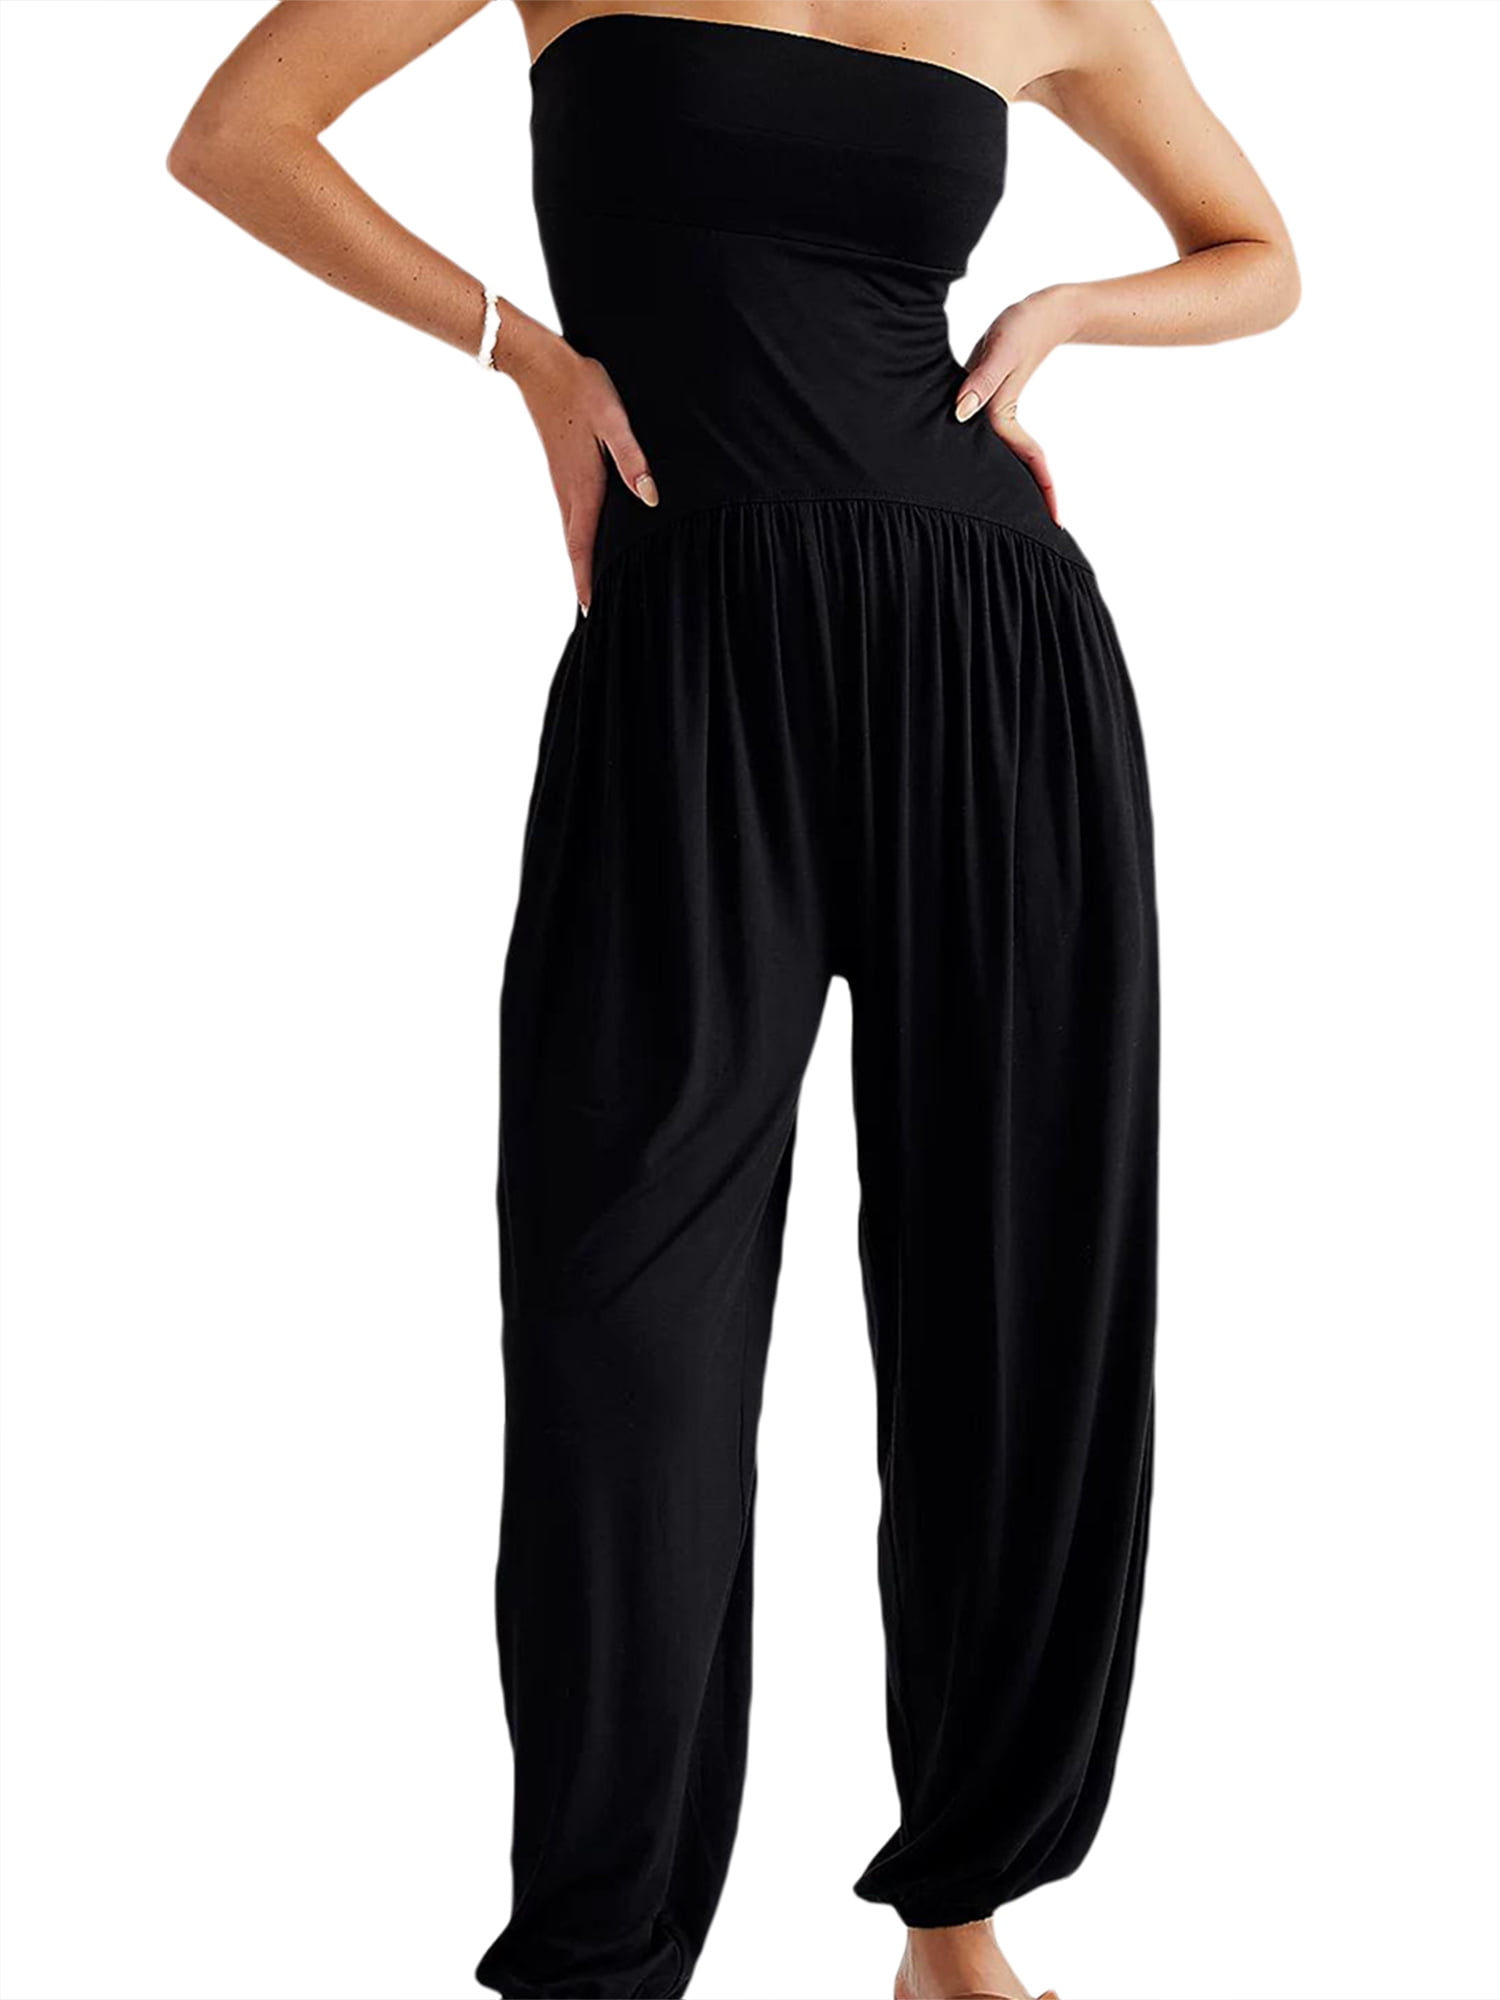 Women's Casual Loose Rompers Strapless Flowy Jumpsuit High Waist Playsuit  Wide Leg Long Pants Summer Sleeveless Trousers Pockets